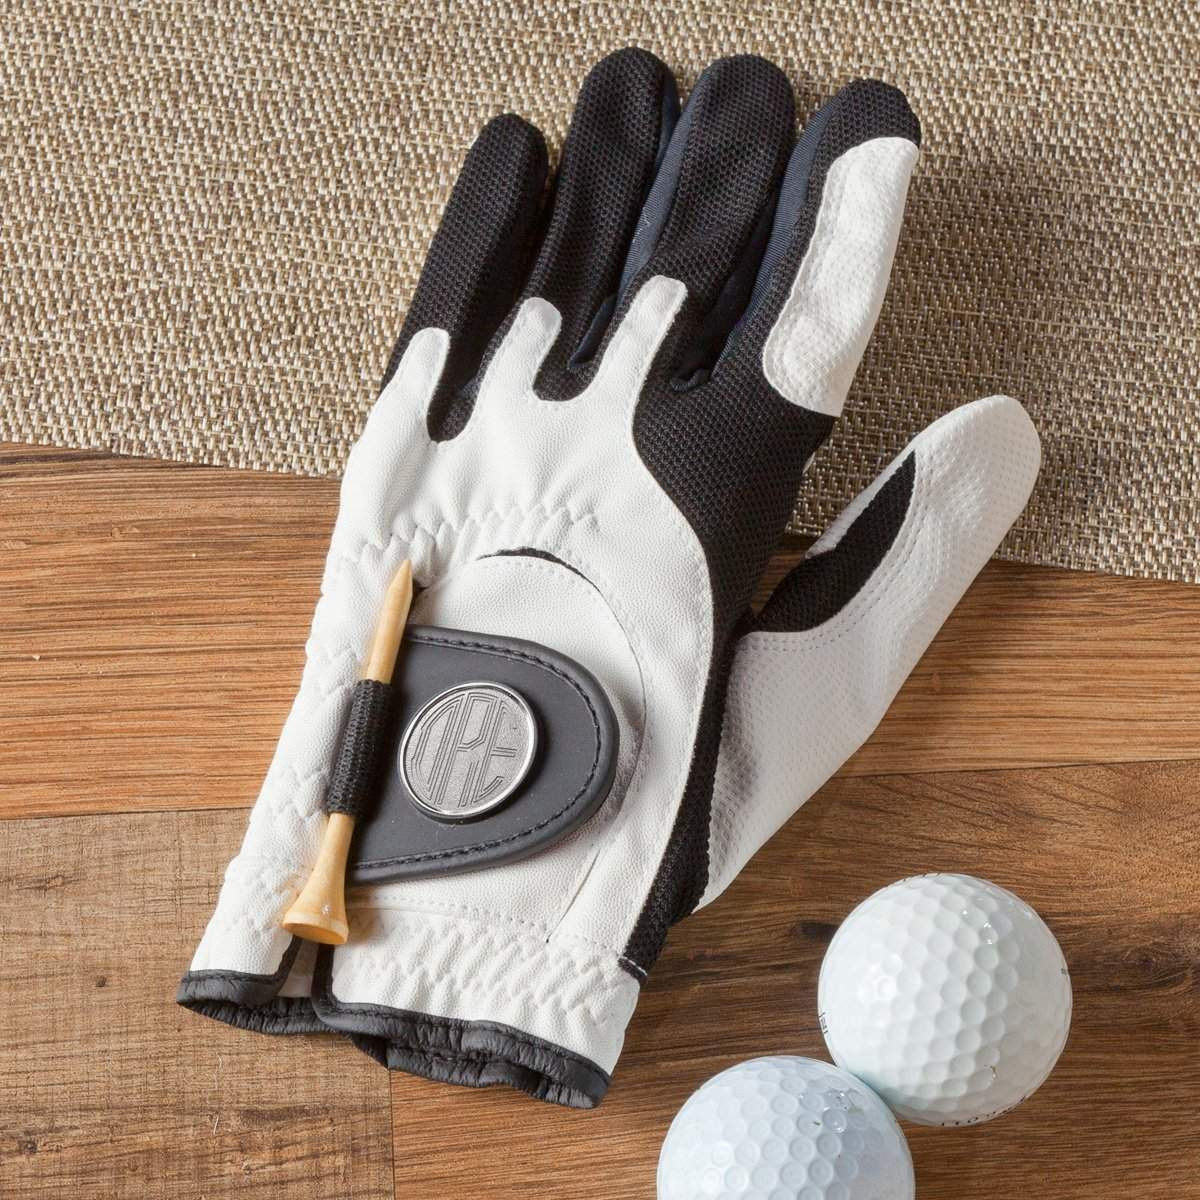 Best Golf Gift Ideas
 Top 20 Best Gifts for Golfers